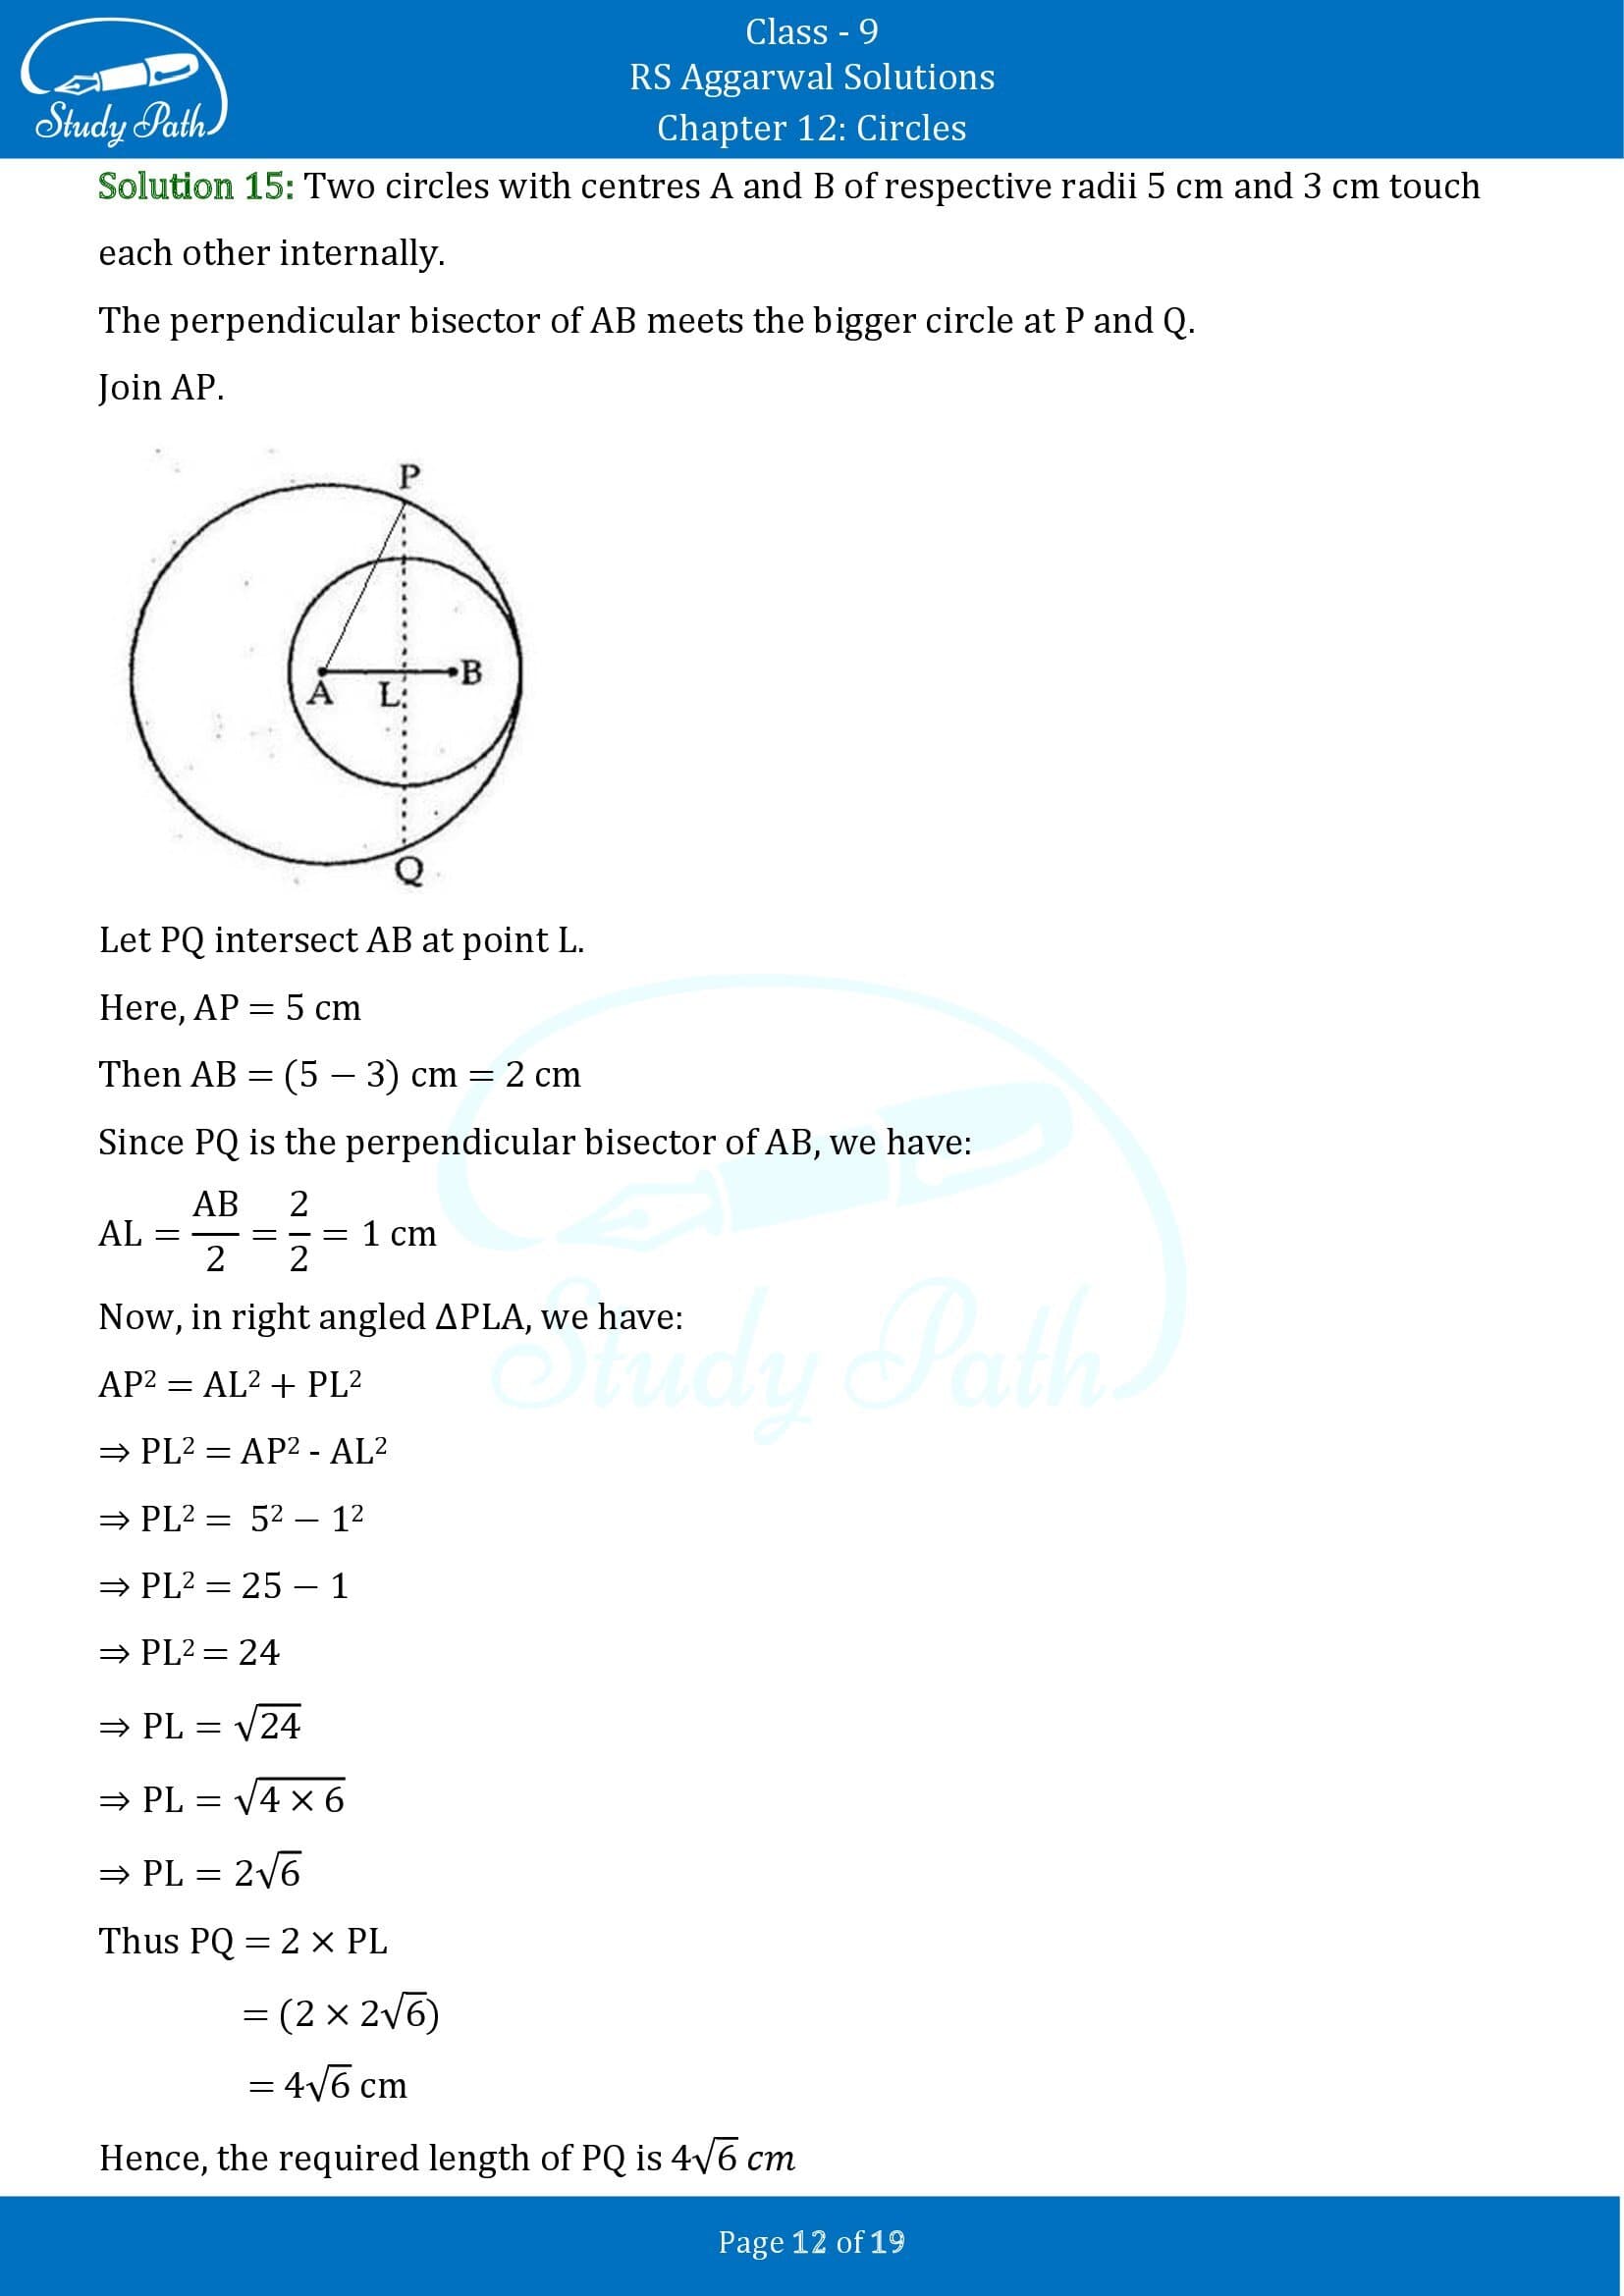 RS Aggarwal Solutions Class 9 Chapter 12 Circles Exercise 12A 00012